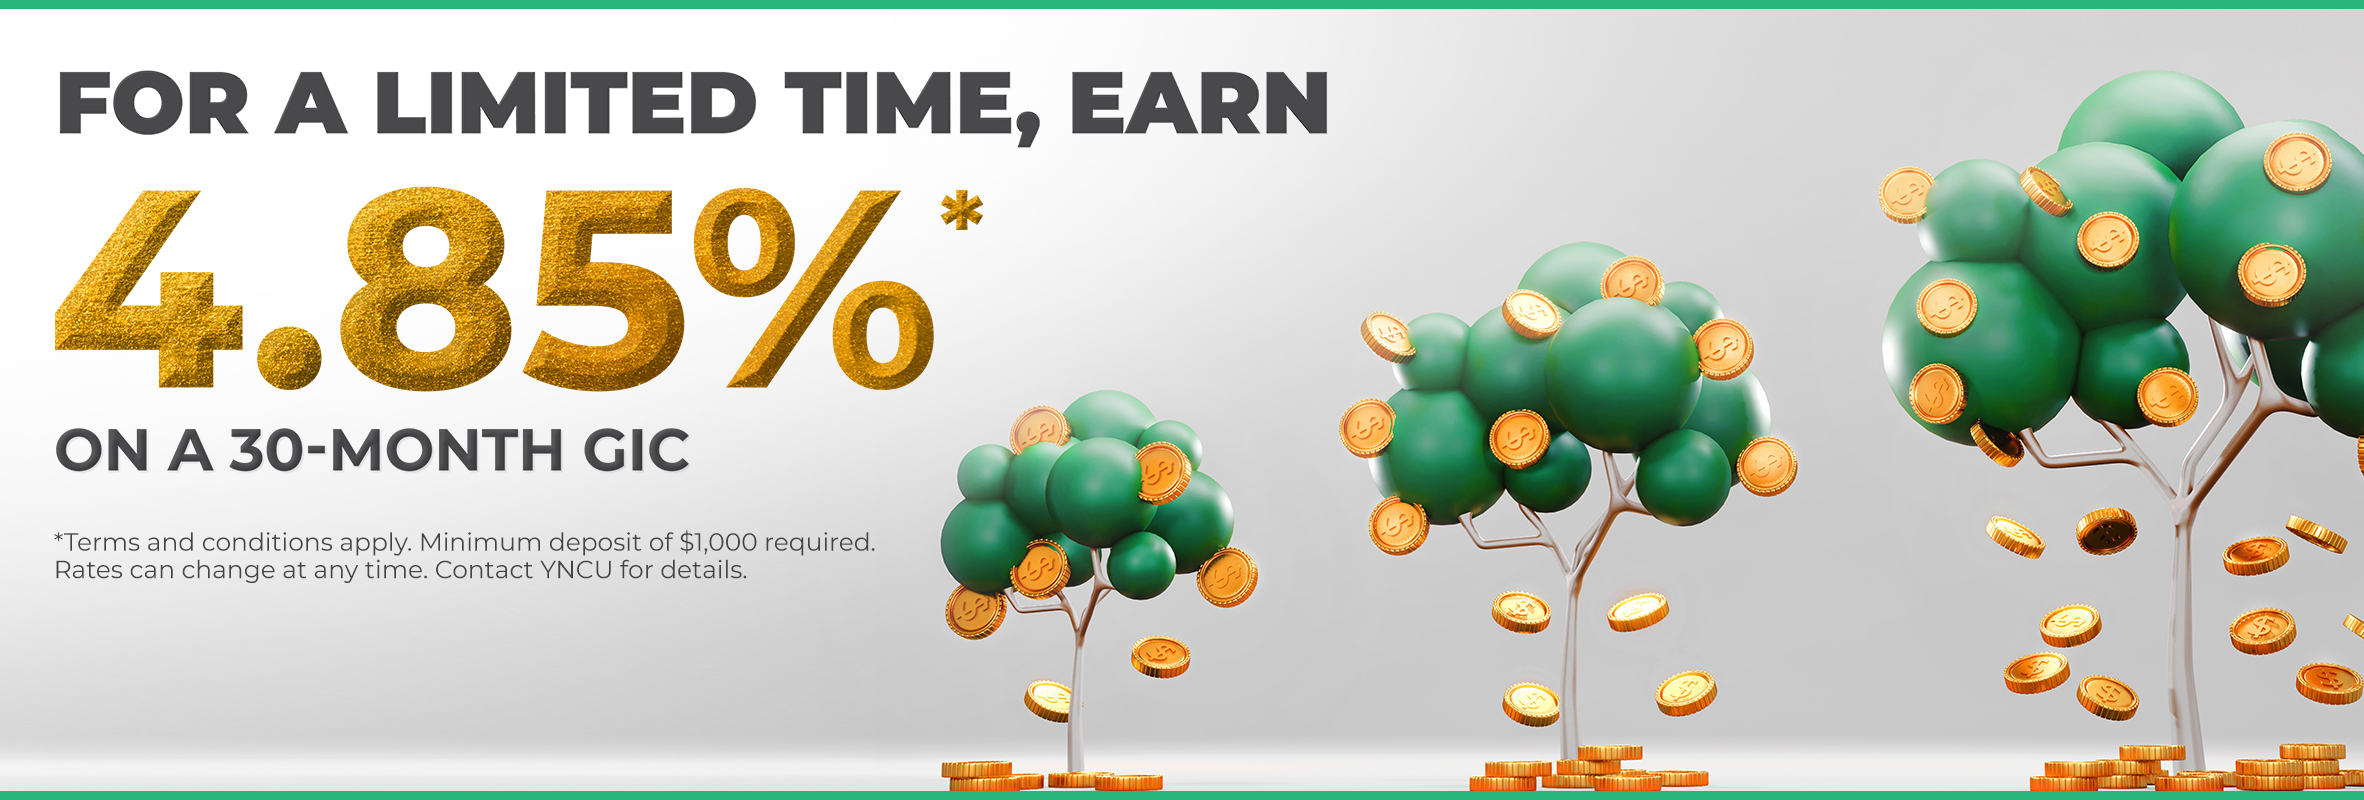 Trees with coins falling from them with text reading for a limited time earn 5.15% on a 30 month GIC